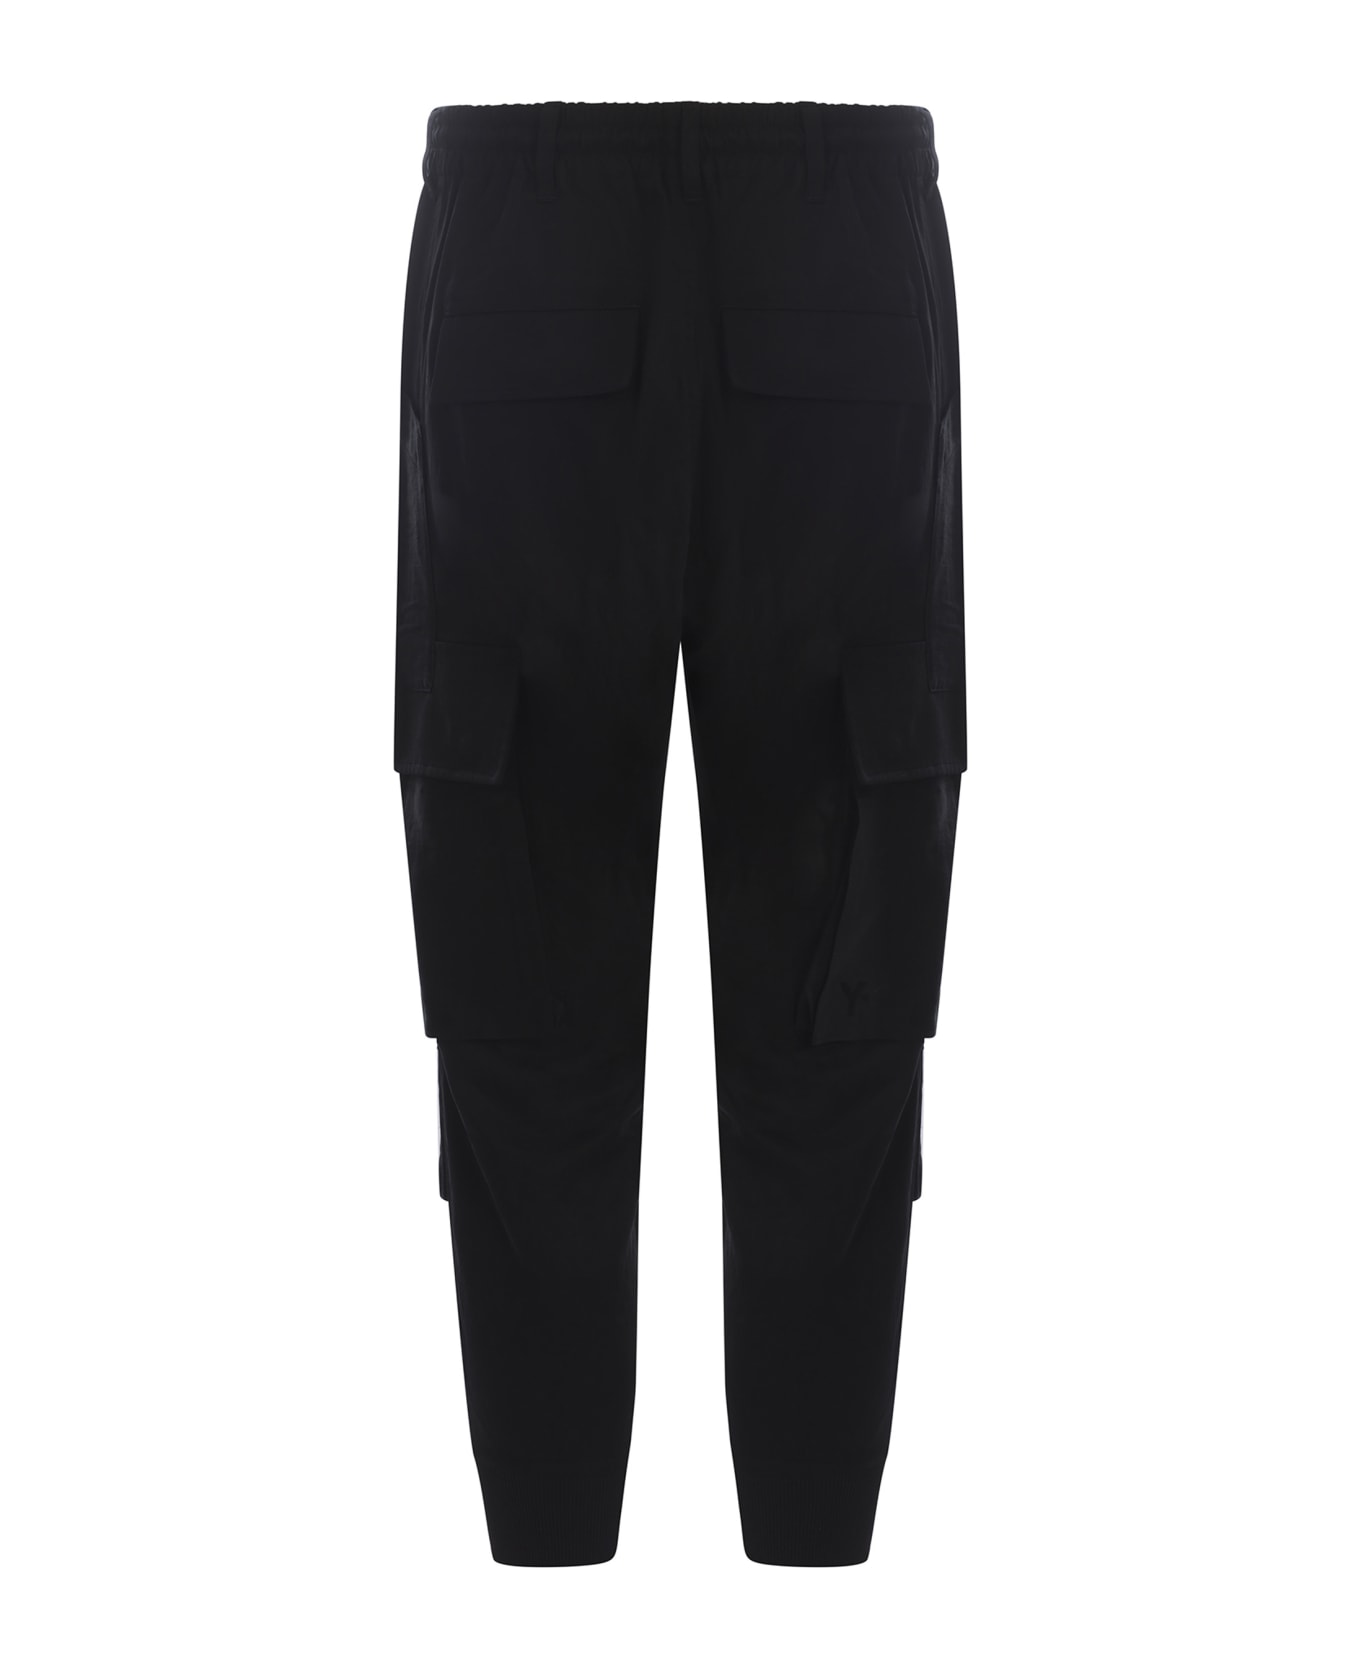 Y-3 Jogging Pants With Pockets - Black ボトムス